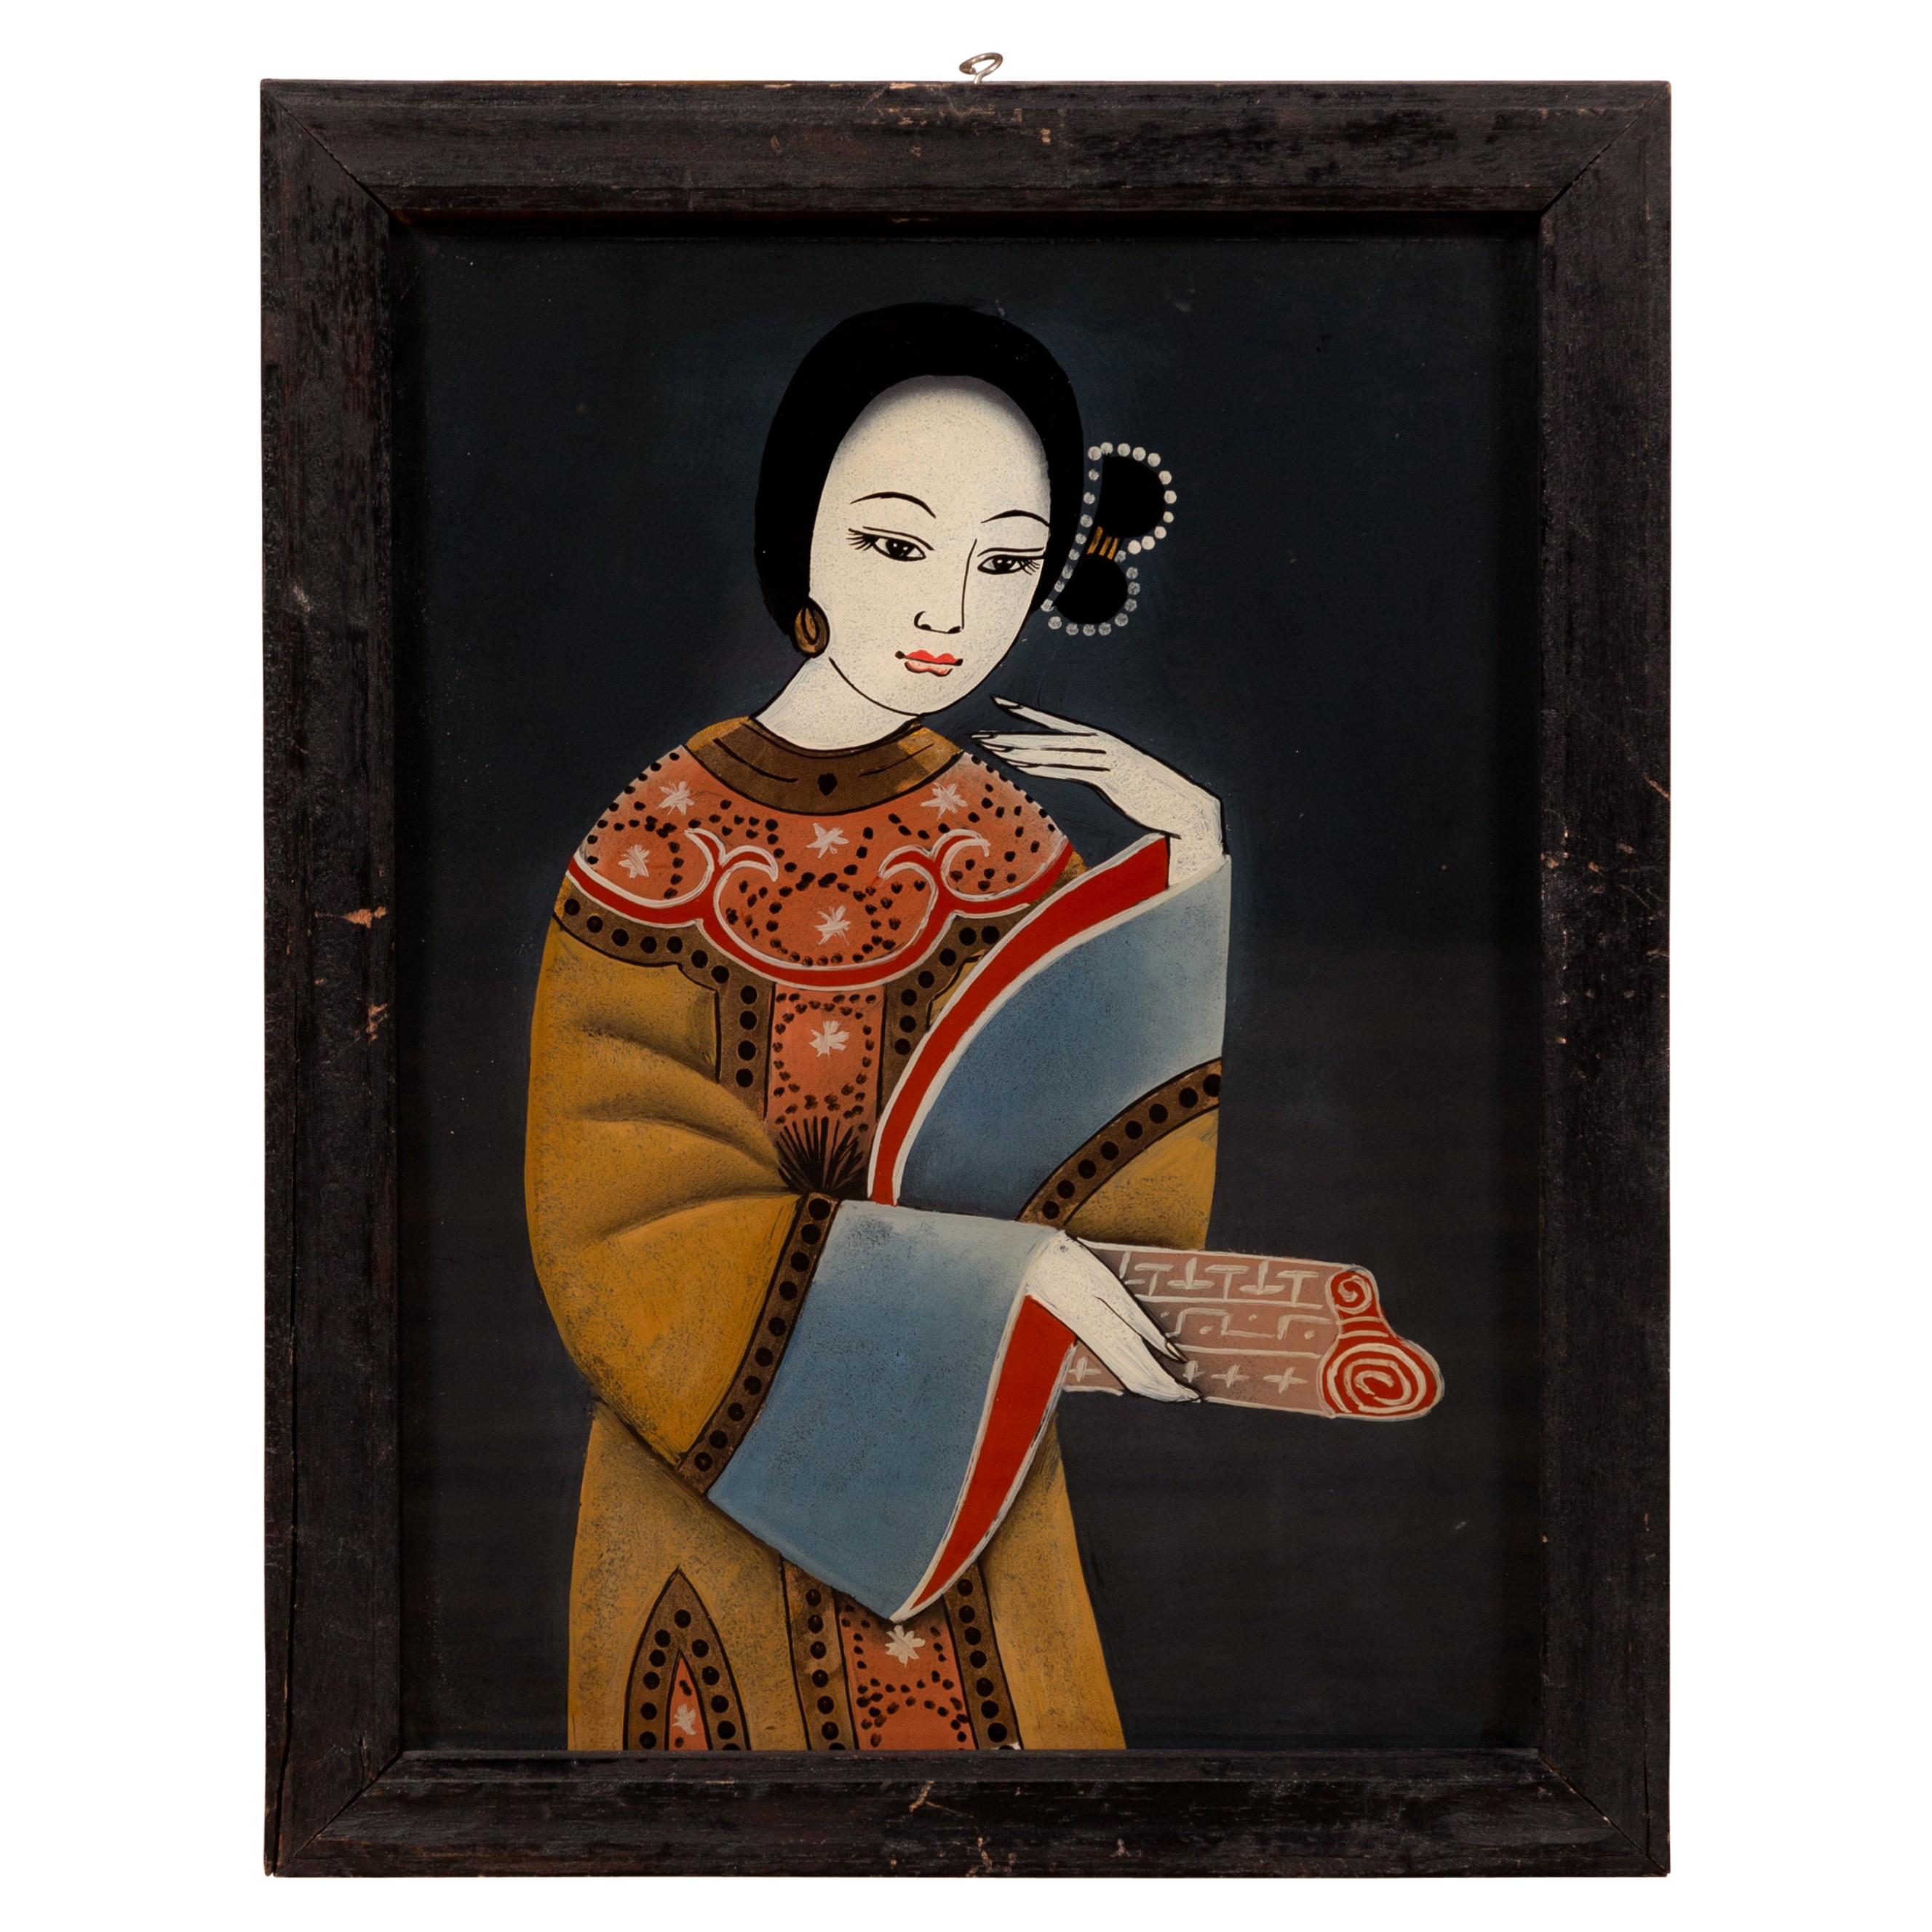 Antique Japanese Painting on Glass Depicting a Woman, Set in a Black Frame